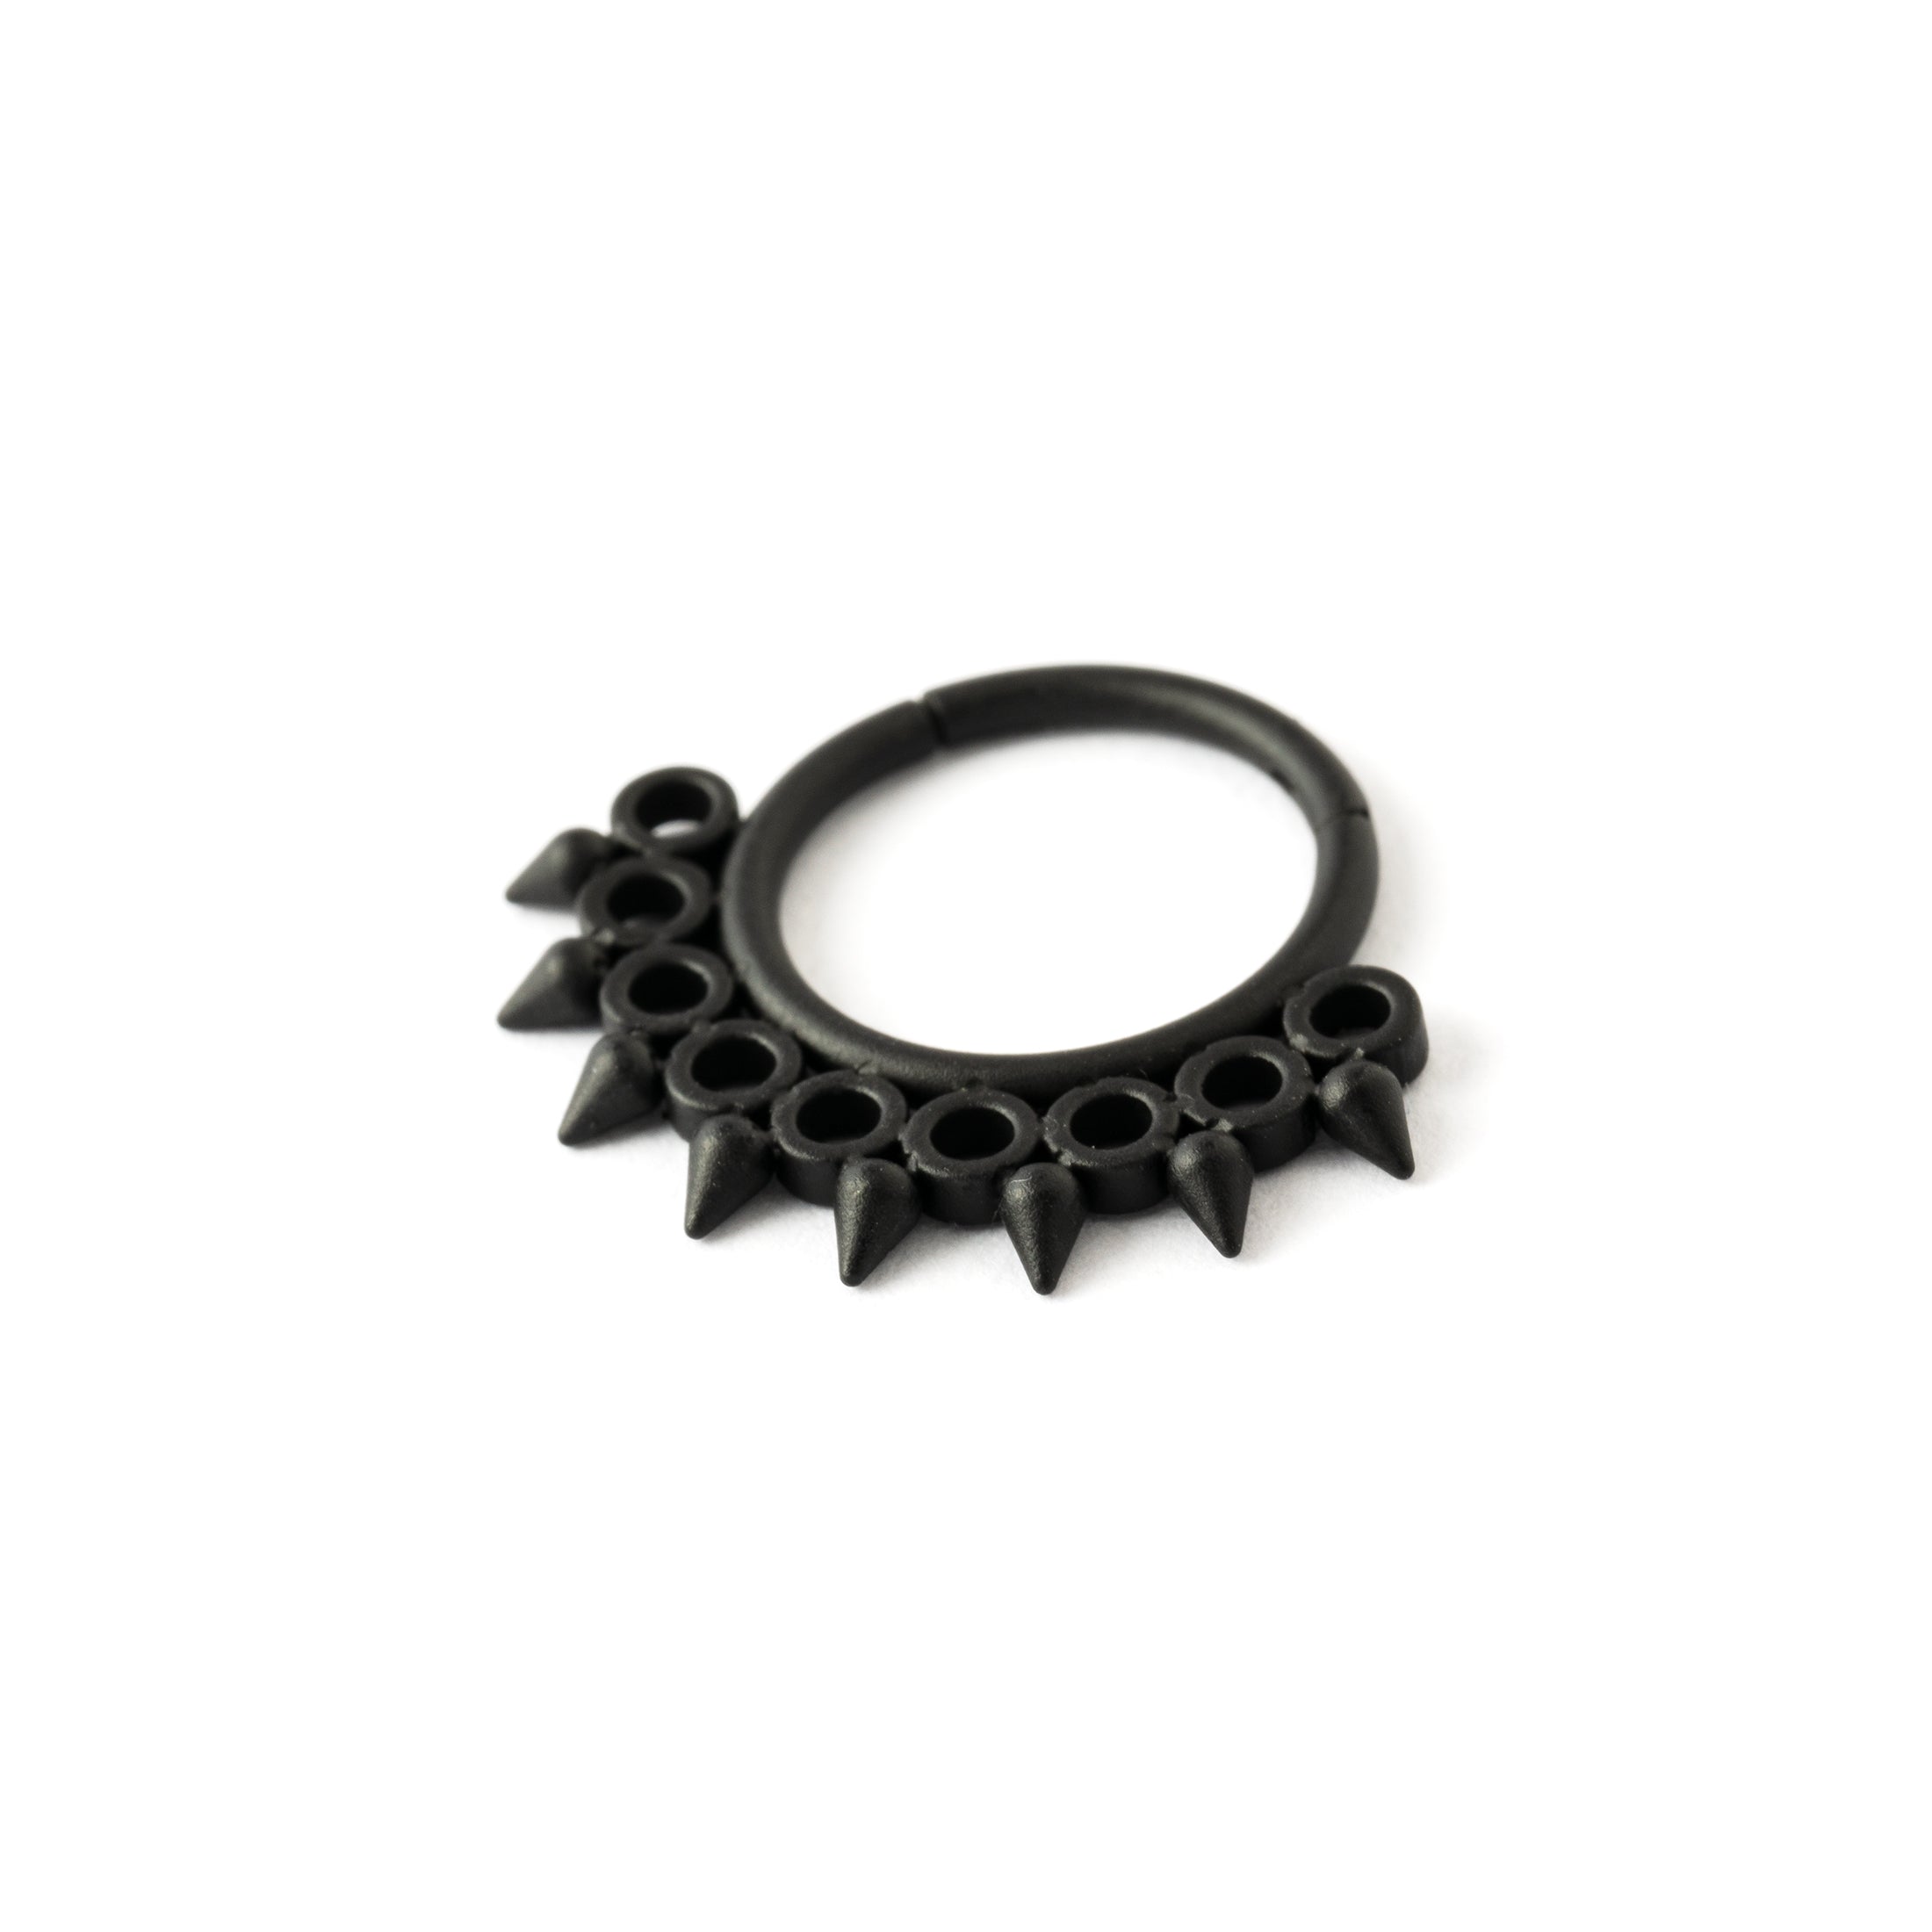 Triton Black surgical steel Septum Clicker ring right side view